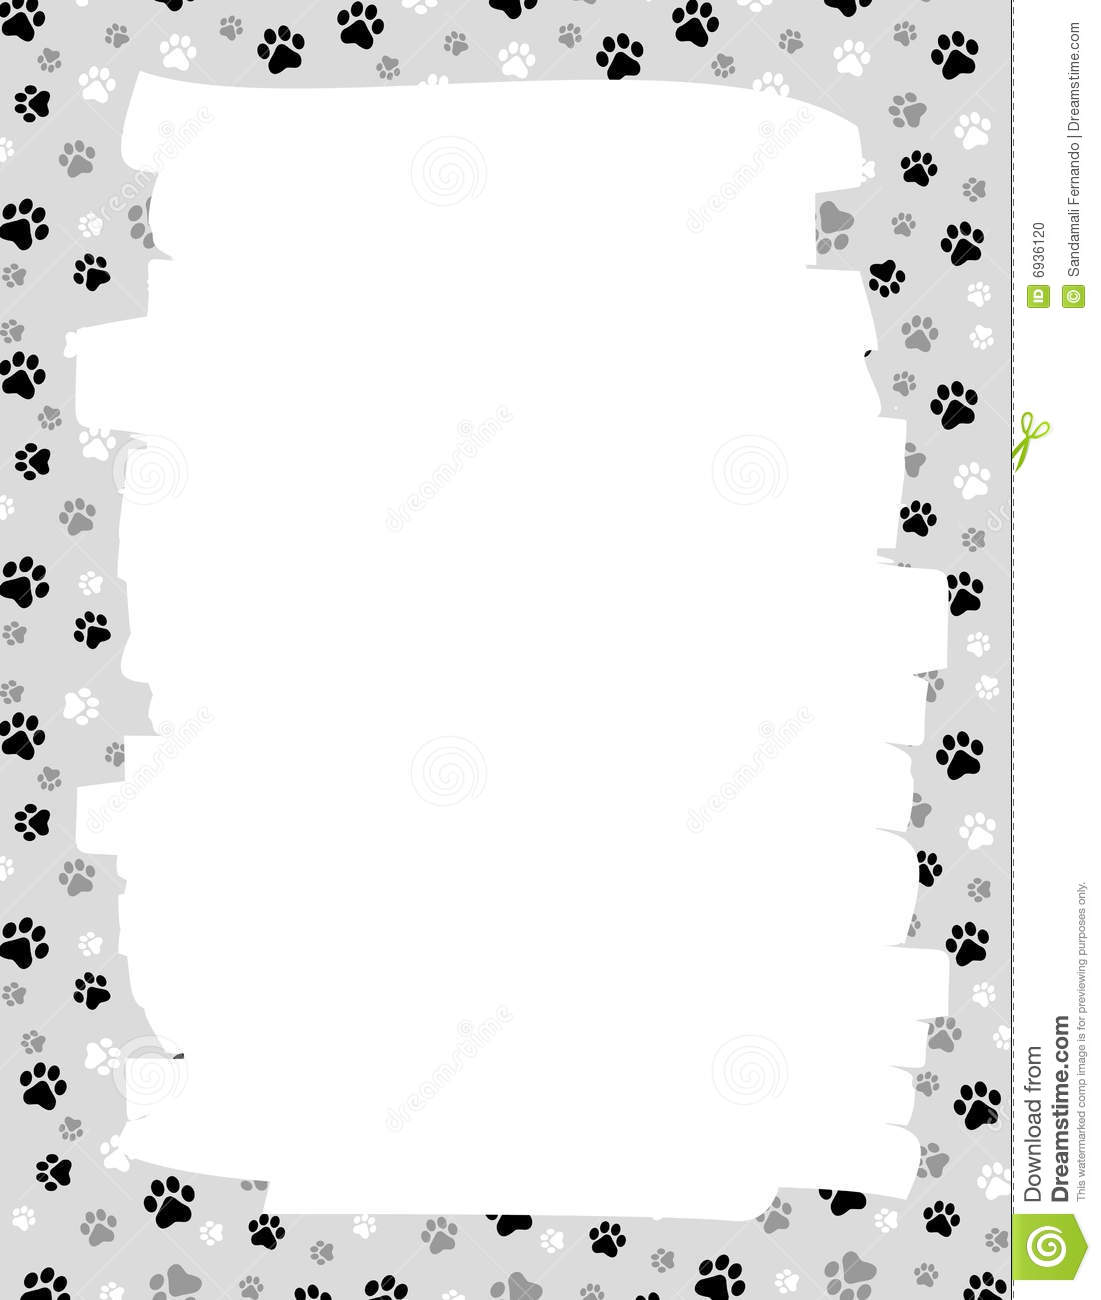 free dog paws page borders in word 2010 free download